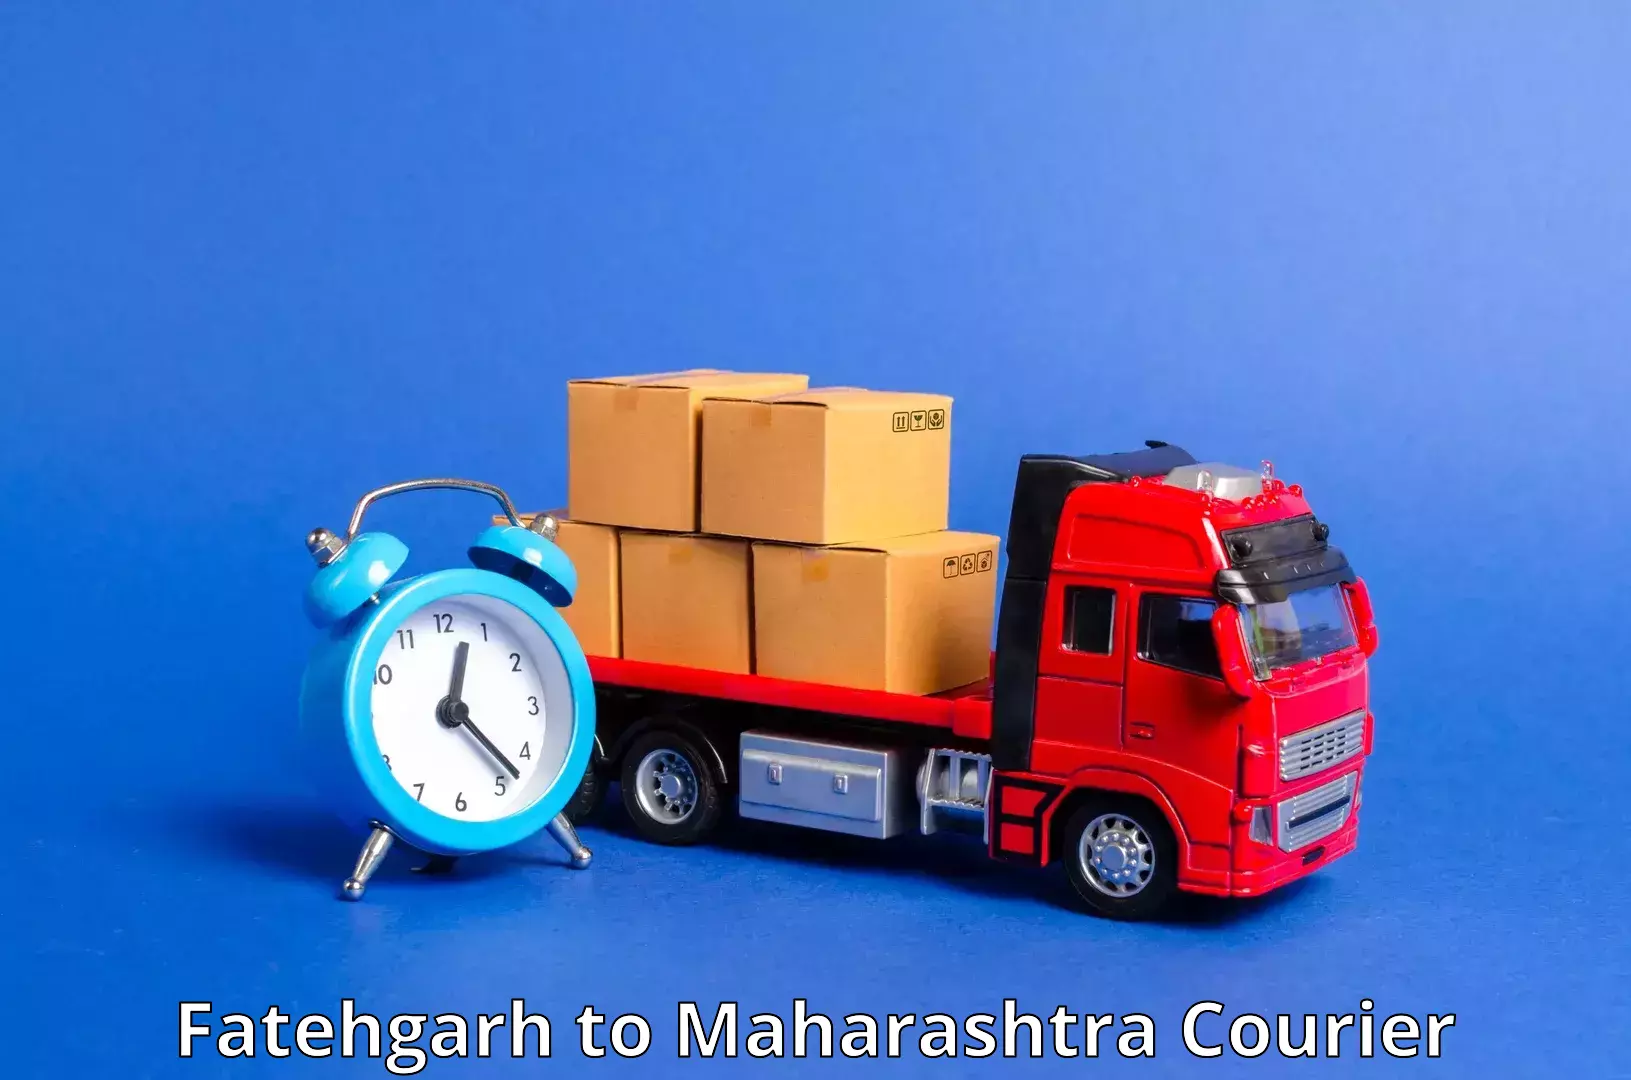 Nationwide parcel services Fatehgarh to Maharashtra